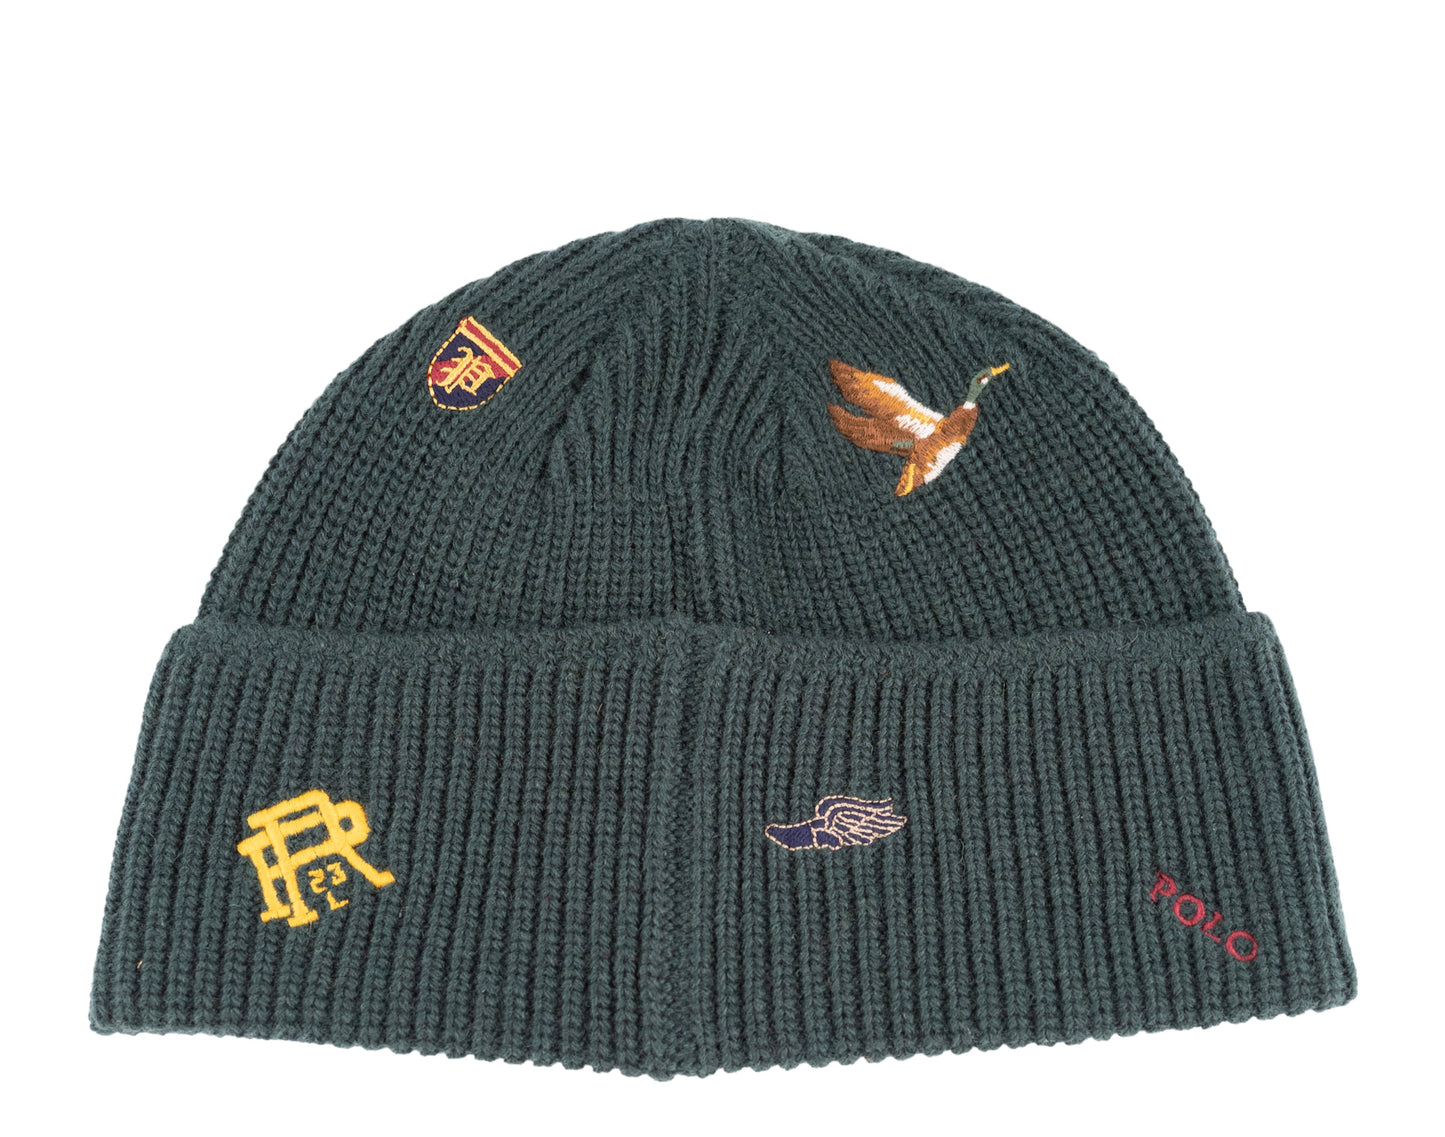 Polo Ralph Lauren Embroidered Icons Knit Beanie